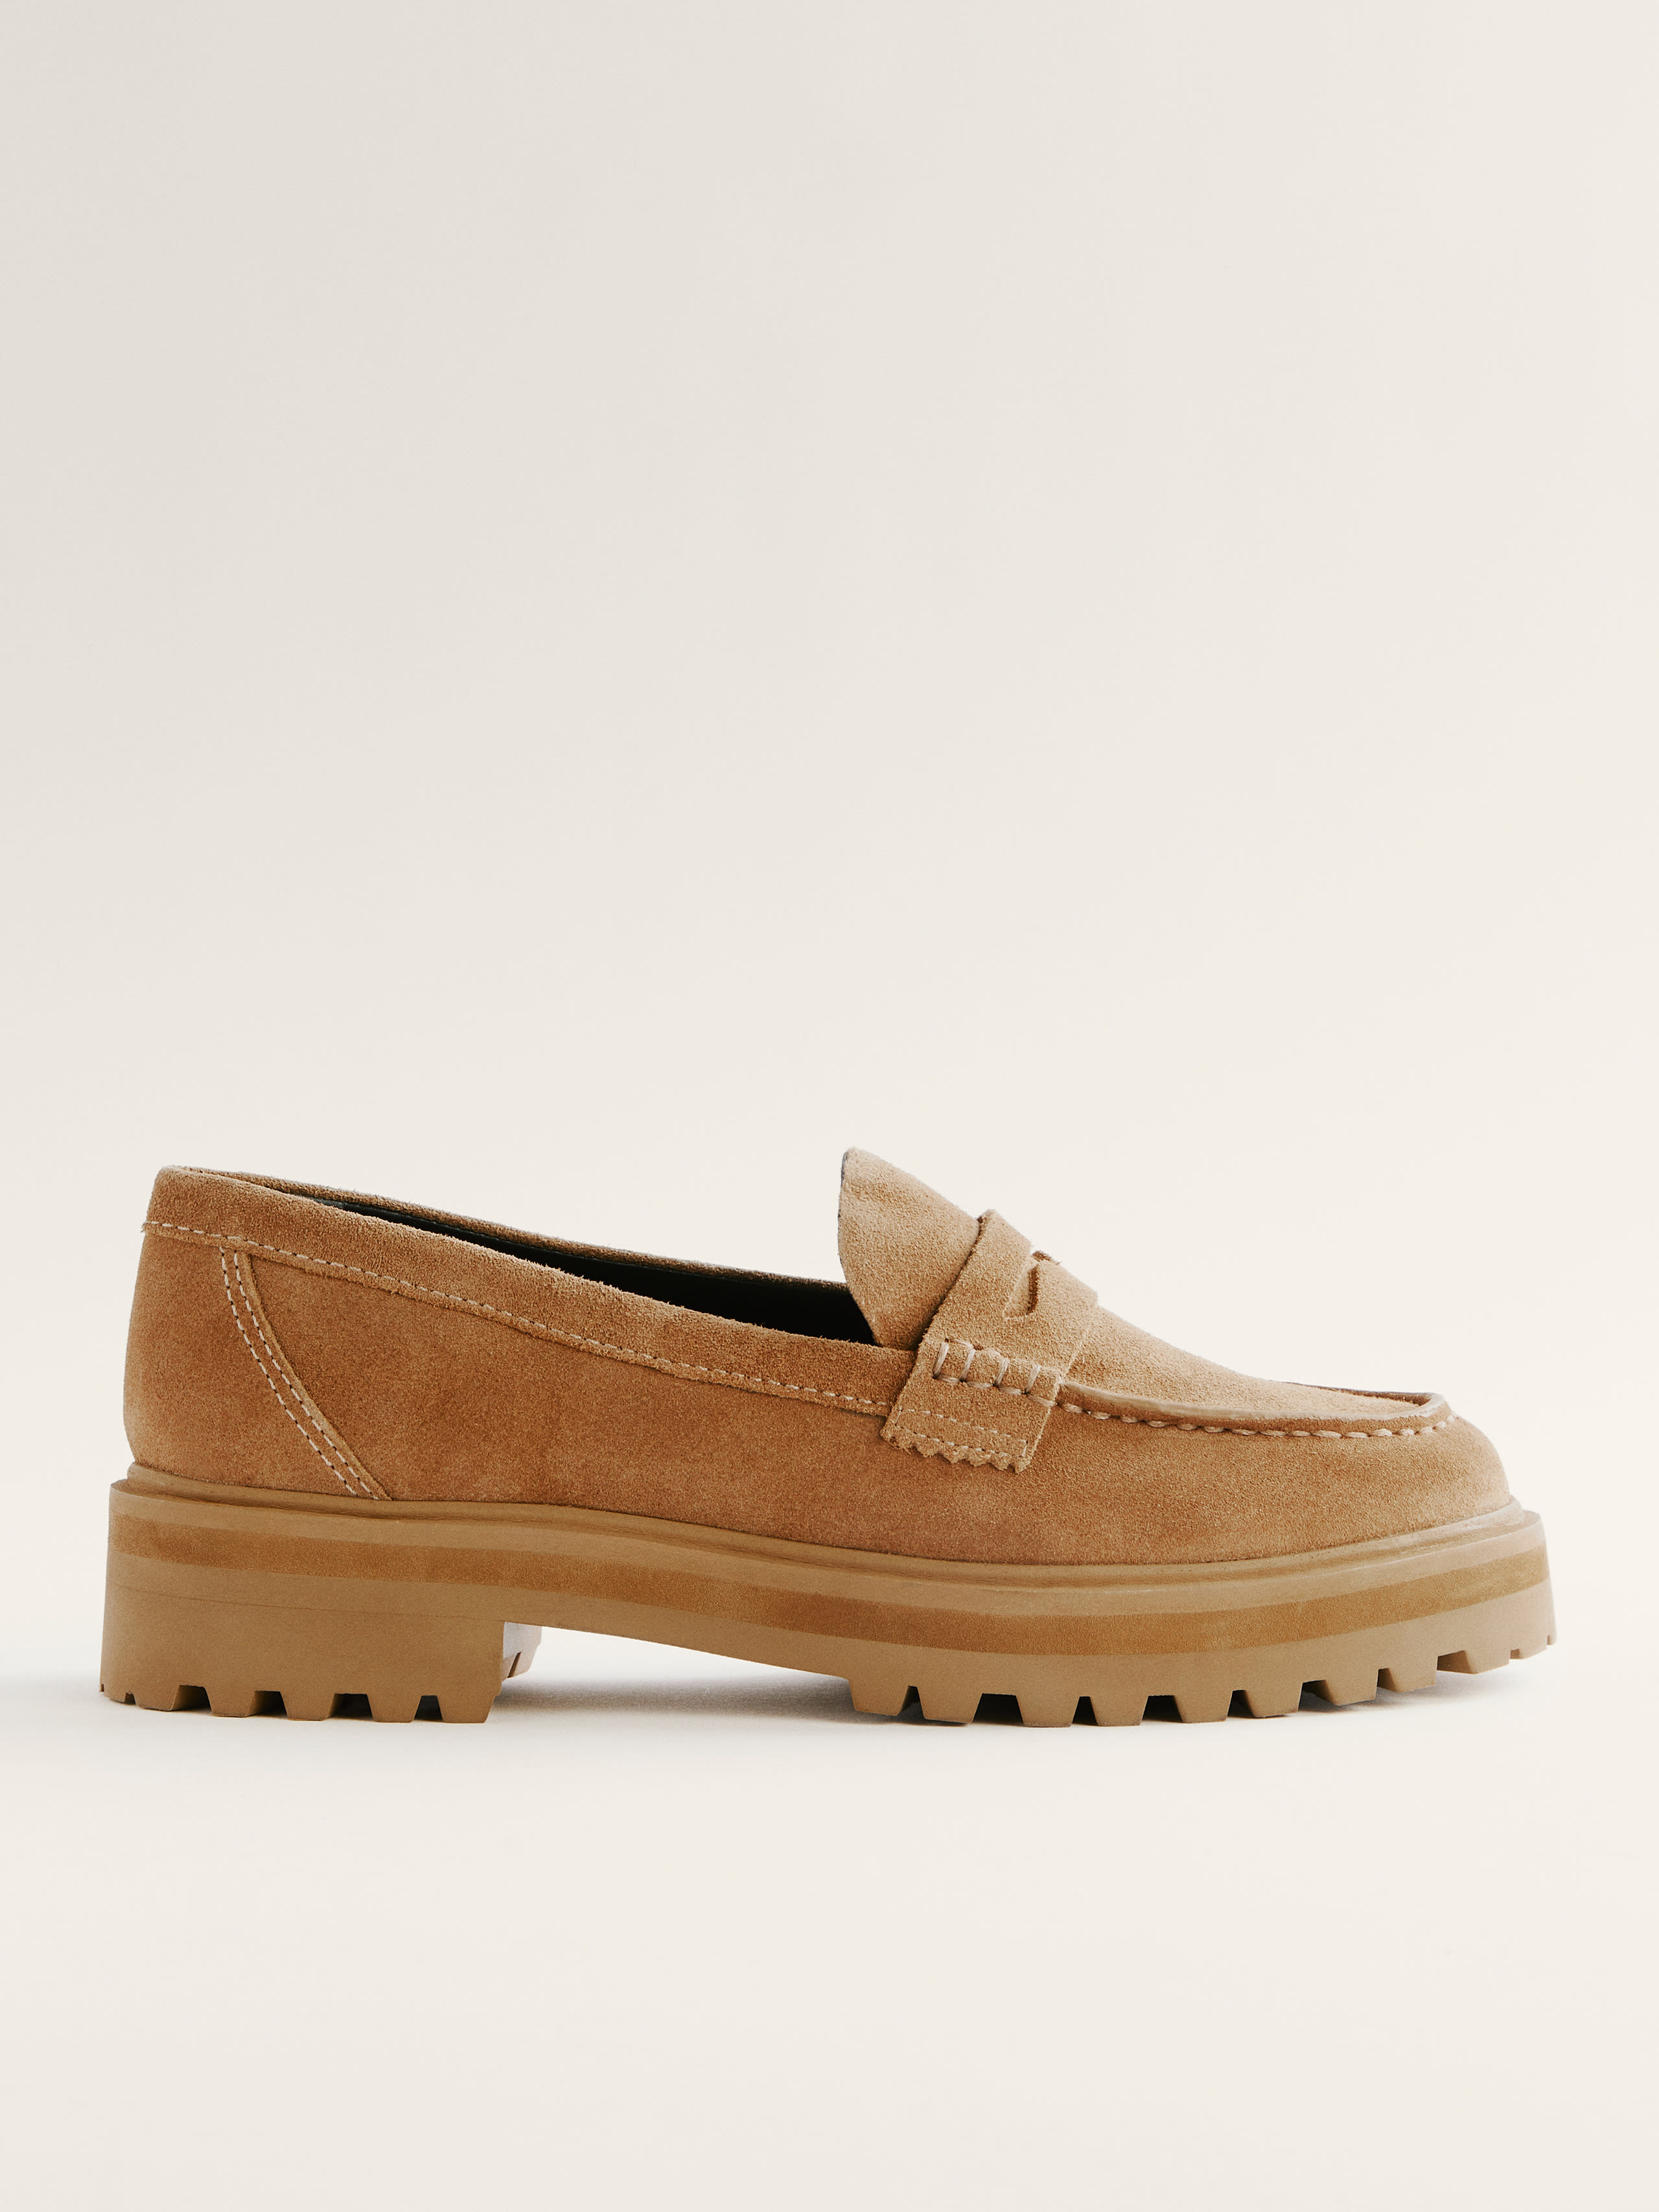 REFORMATION AGATHEA CHUNKY LOAFER